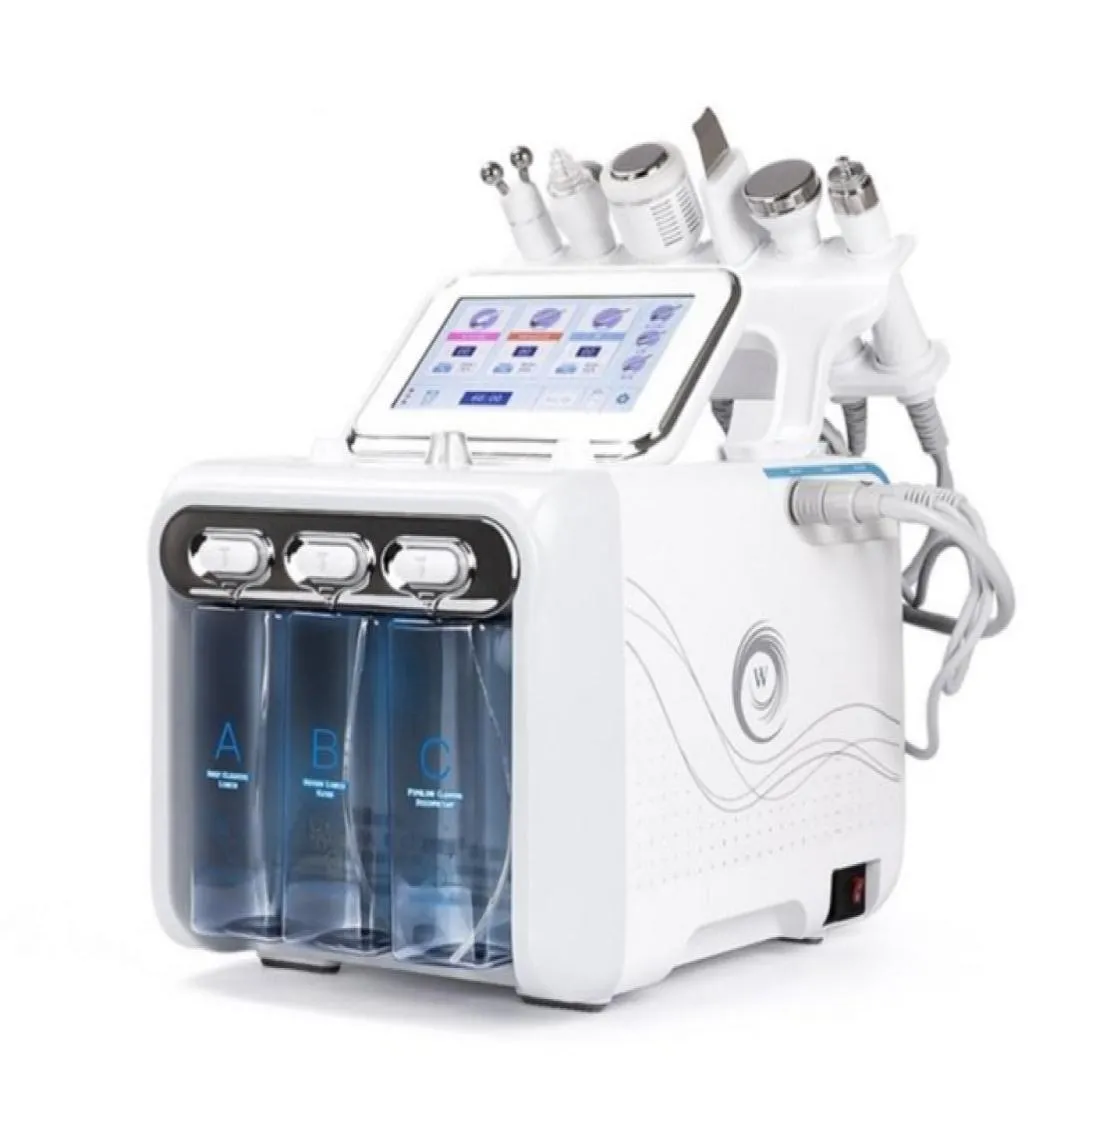 6 in 1 Hydrafacial Dermabrasion Machine Water Oxygen Jet Peel Hydra Skin Scrubber Facial Beauty Deep Cleansing Rf Face Lifting Col7793857